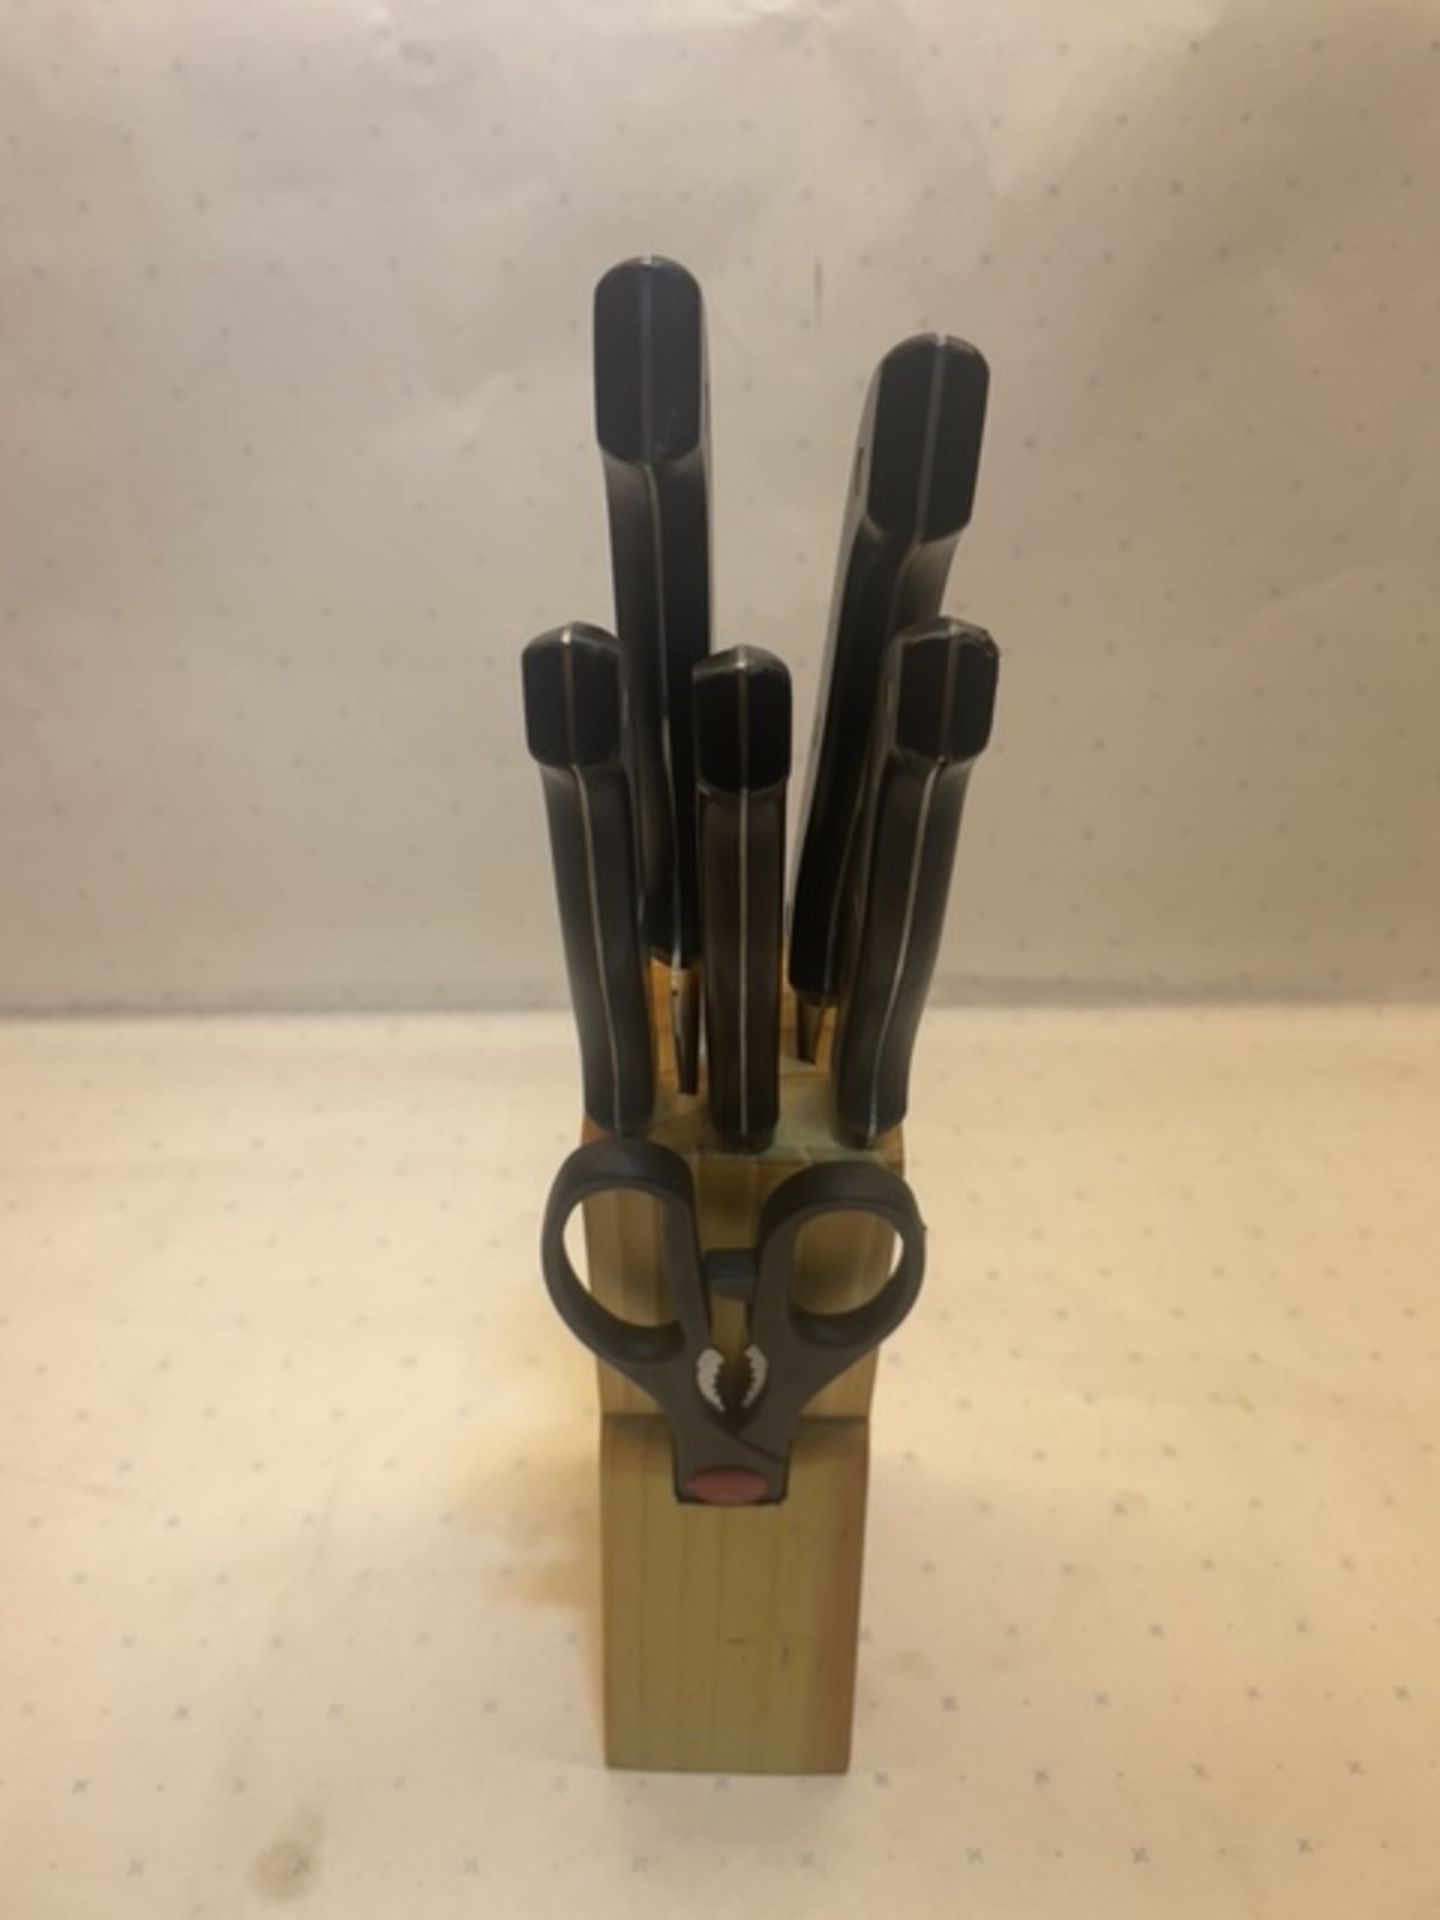 5 X Knife set in Wooden Block with Scissors - Image 2 of 3